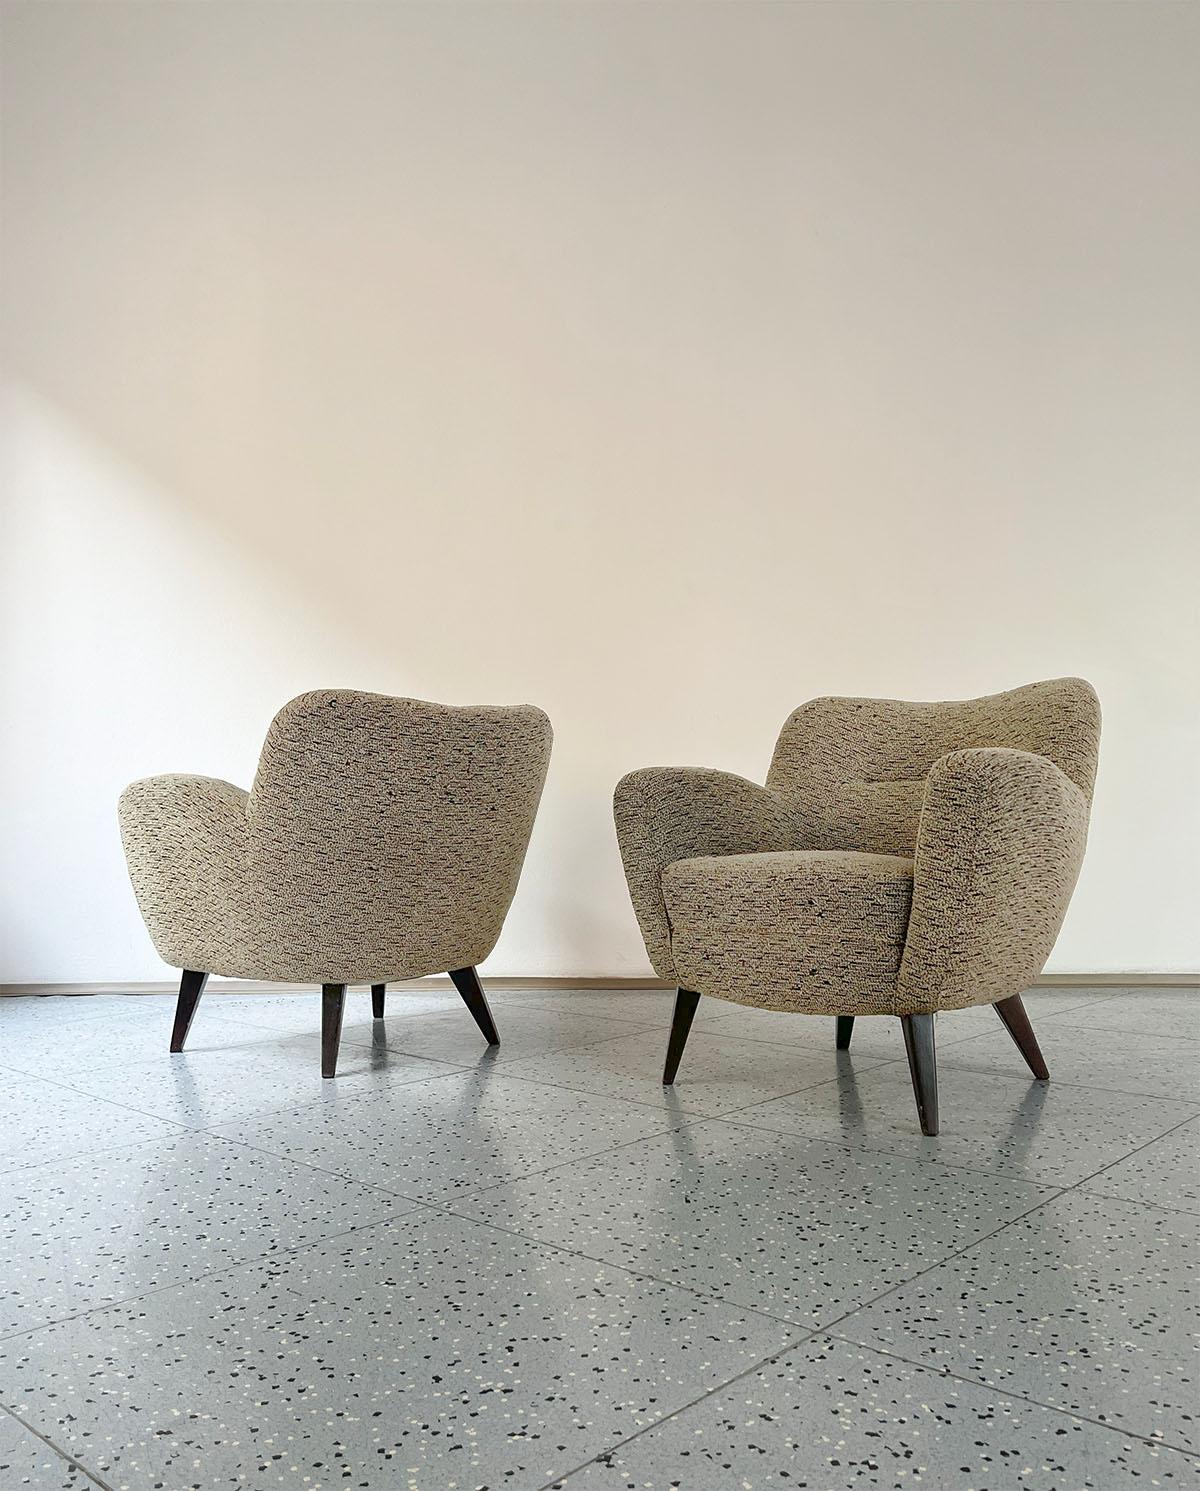 Pair of French lounge chairs in oak and bouclé fabric, made in France, 1950s.

With their slightly round shape, these chairs look absolutely gorgeous, especially in their original light bouclé fabric, which contrasts with the dark oak